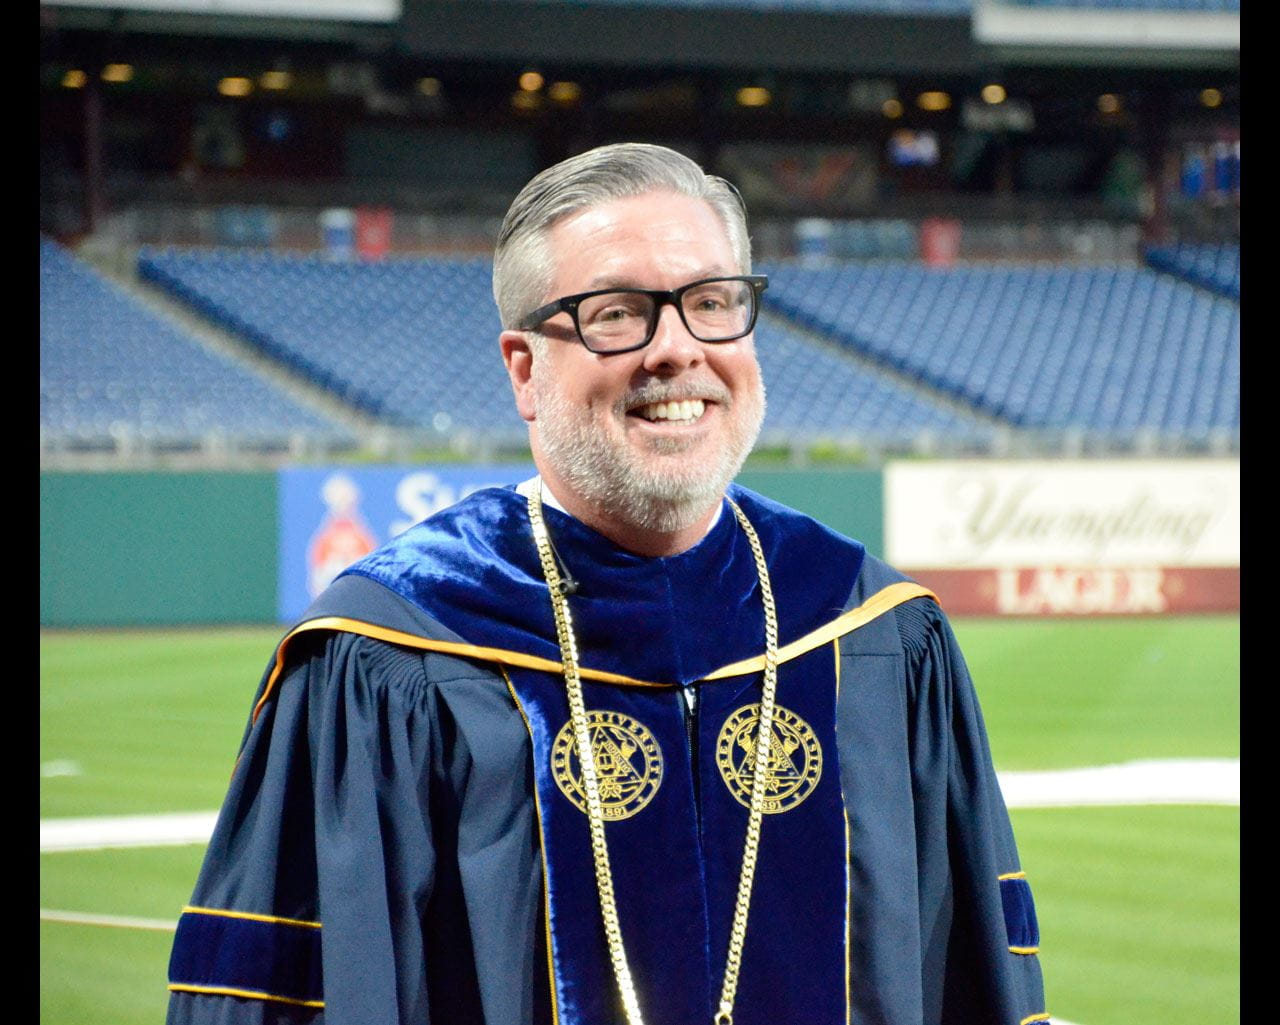 Portrait of John Fry standing in Citizens Bank Park while wearing commencement regalia.